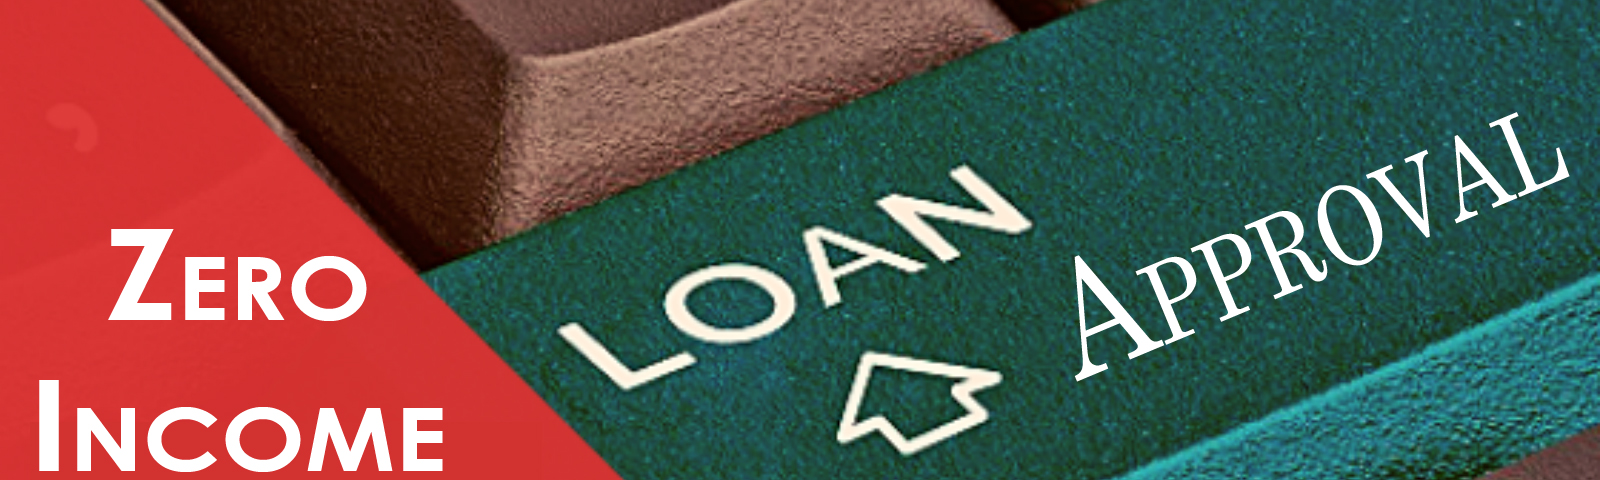 Buzz On Zero Income Approval Loan Is CLEAR!